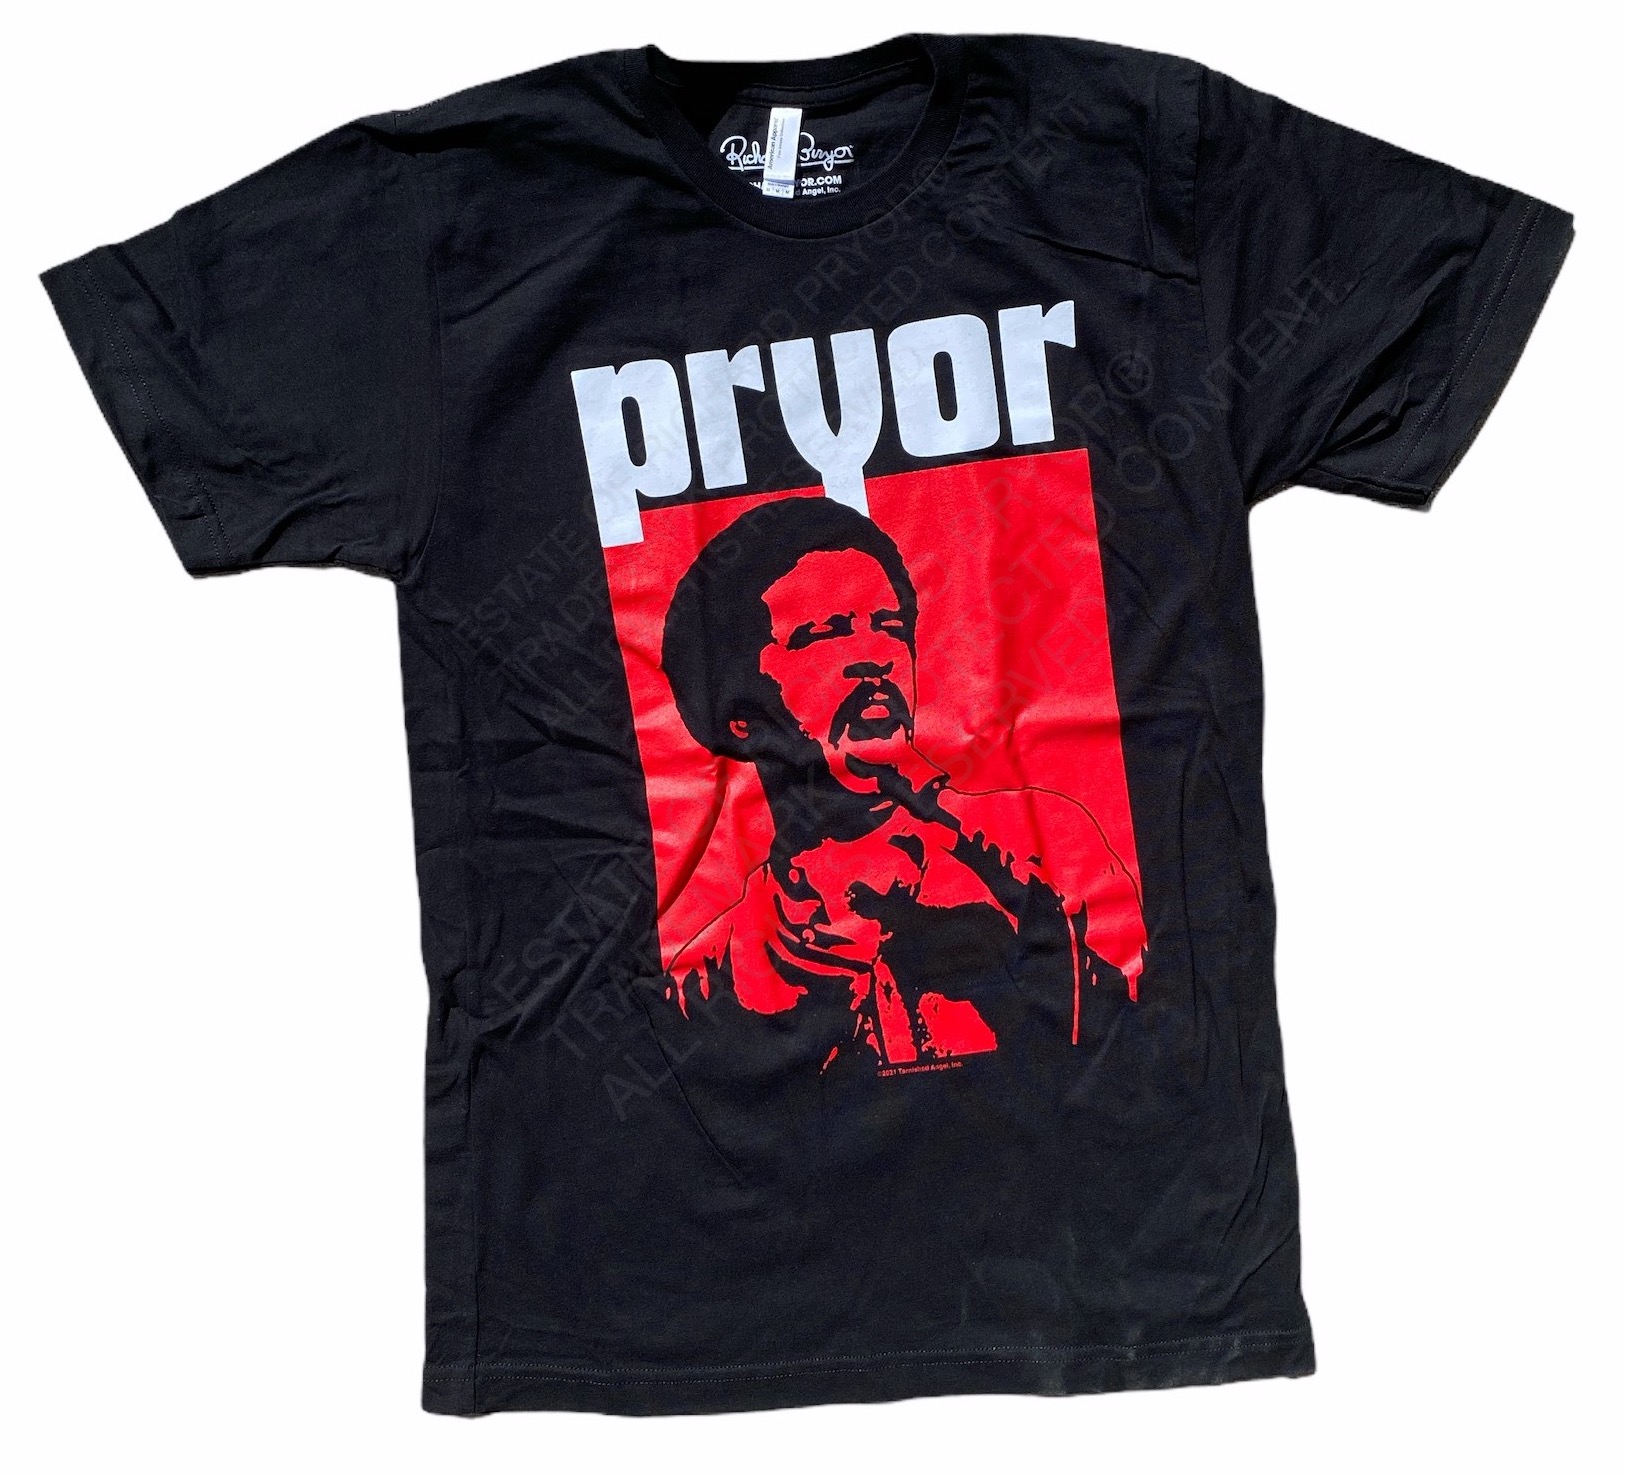 Official Richard Pryor® Black and Red Stencil Tee. Trademark Protected Content.